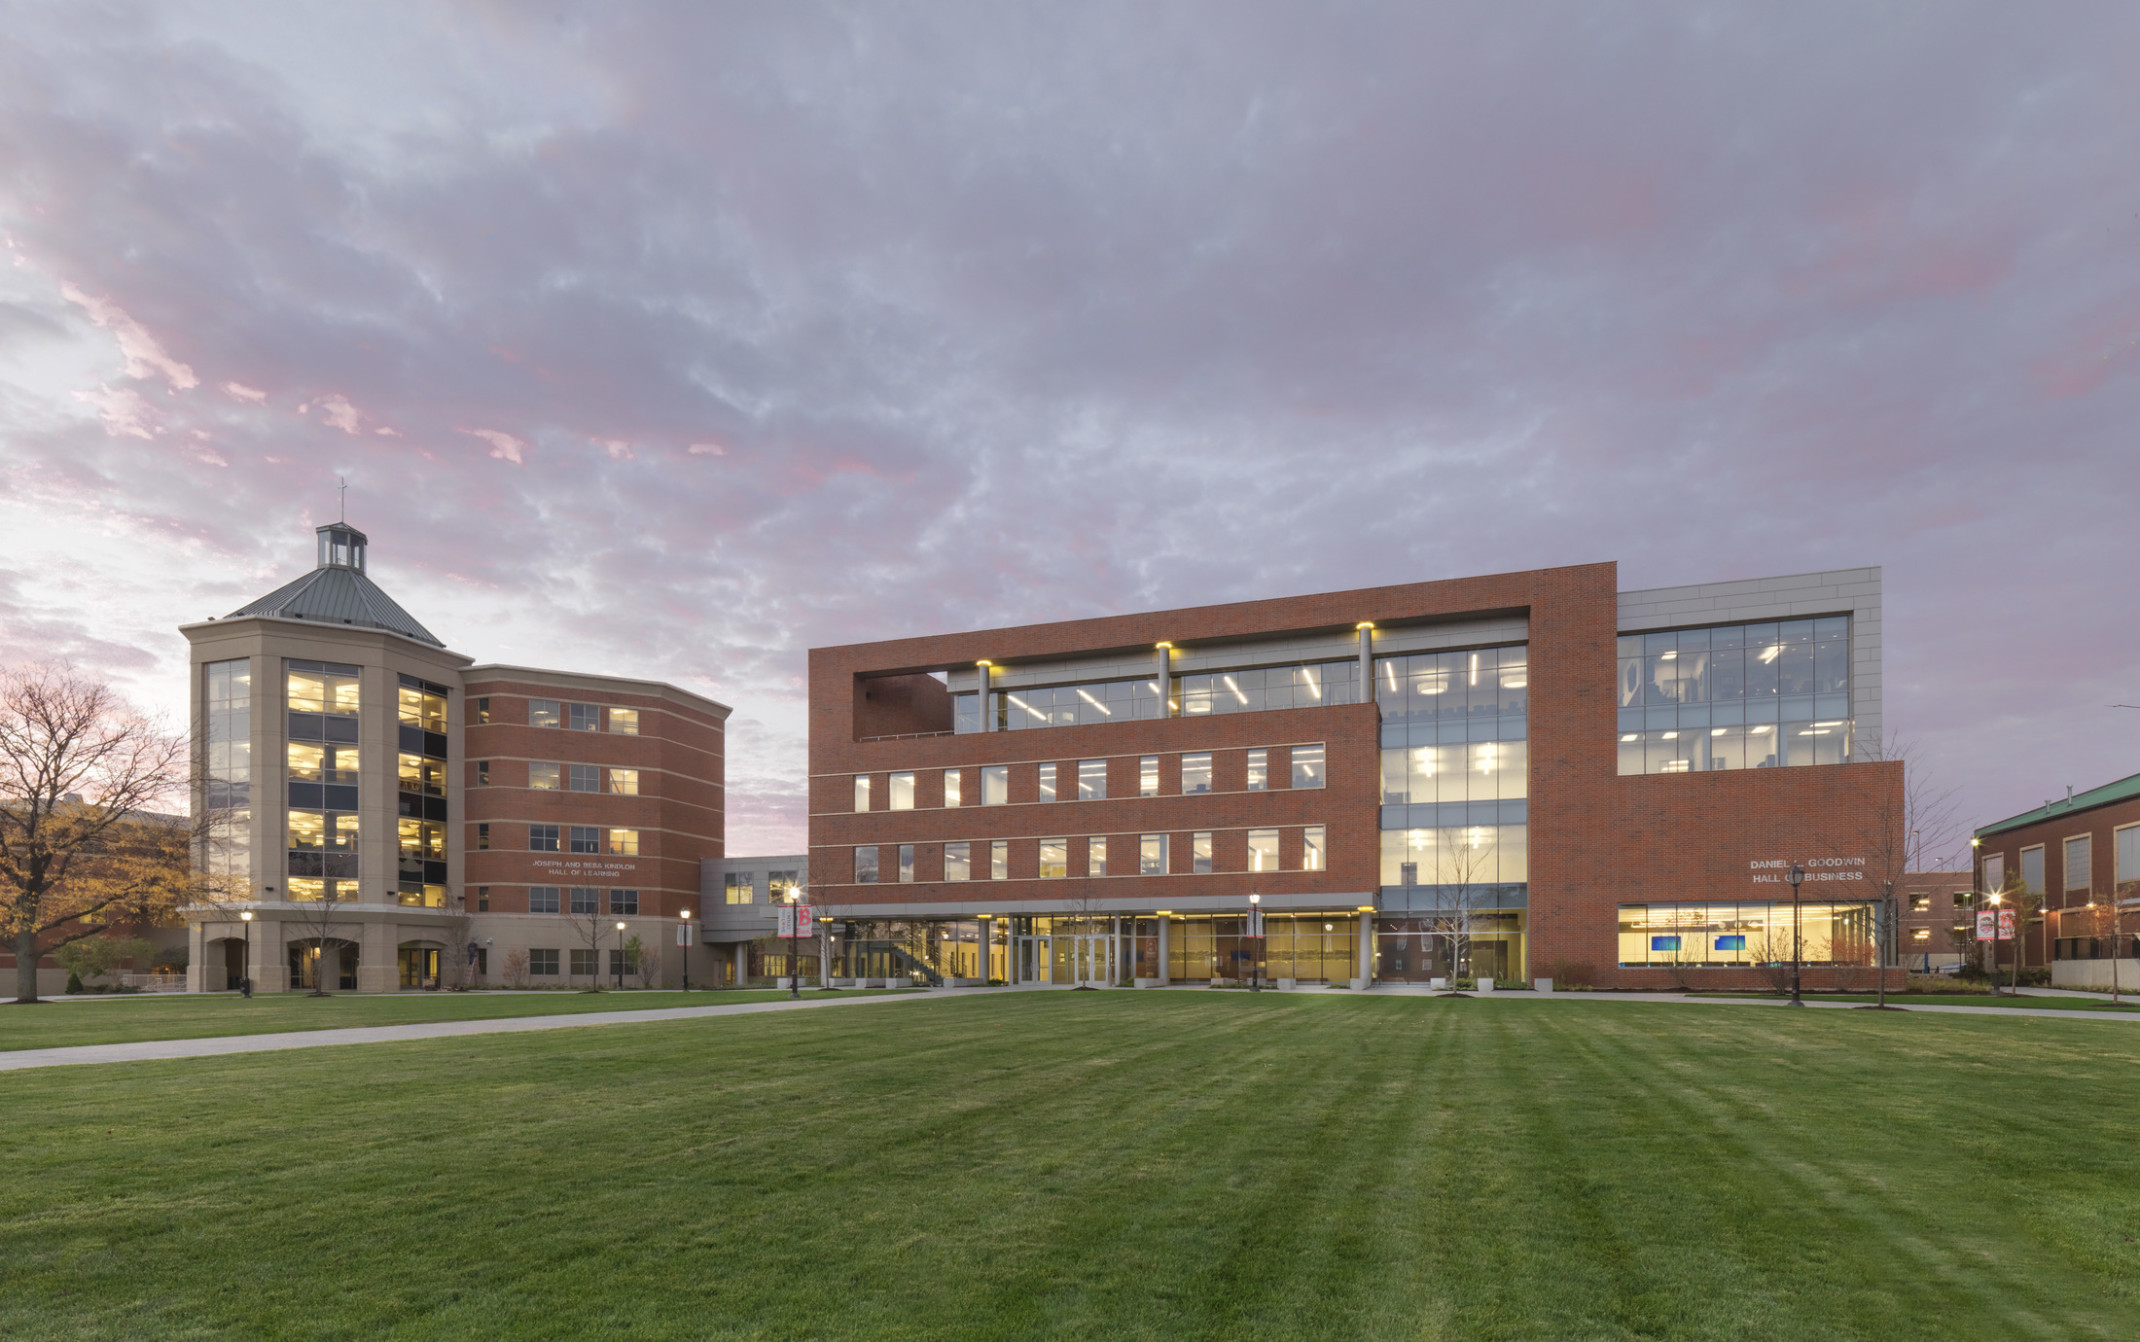 Benedictine University's Goodwin Hall College of Business exterior illuminated from within in the evening, wrapped facade